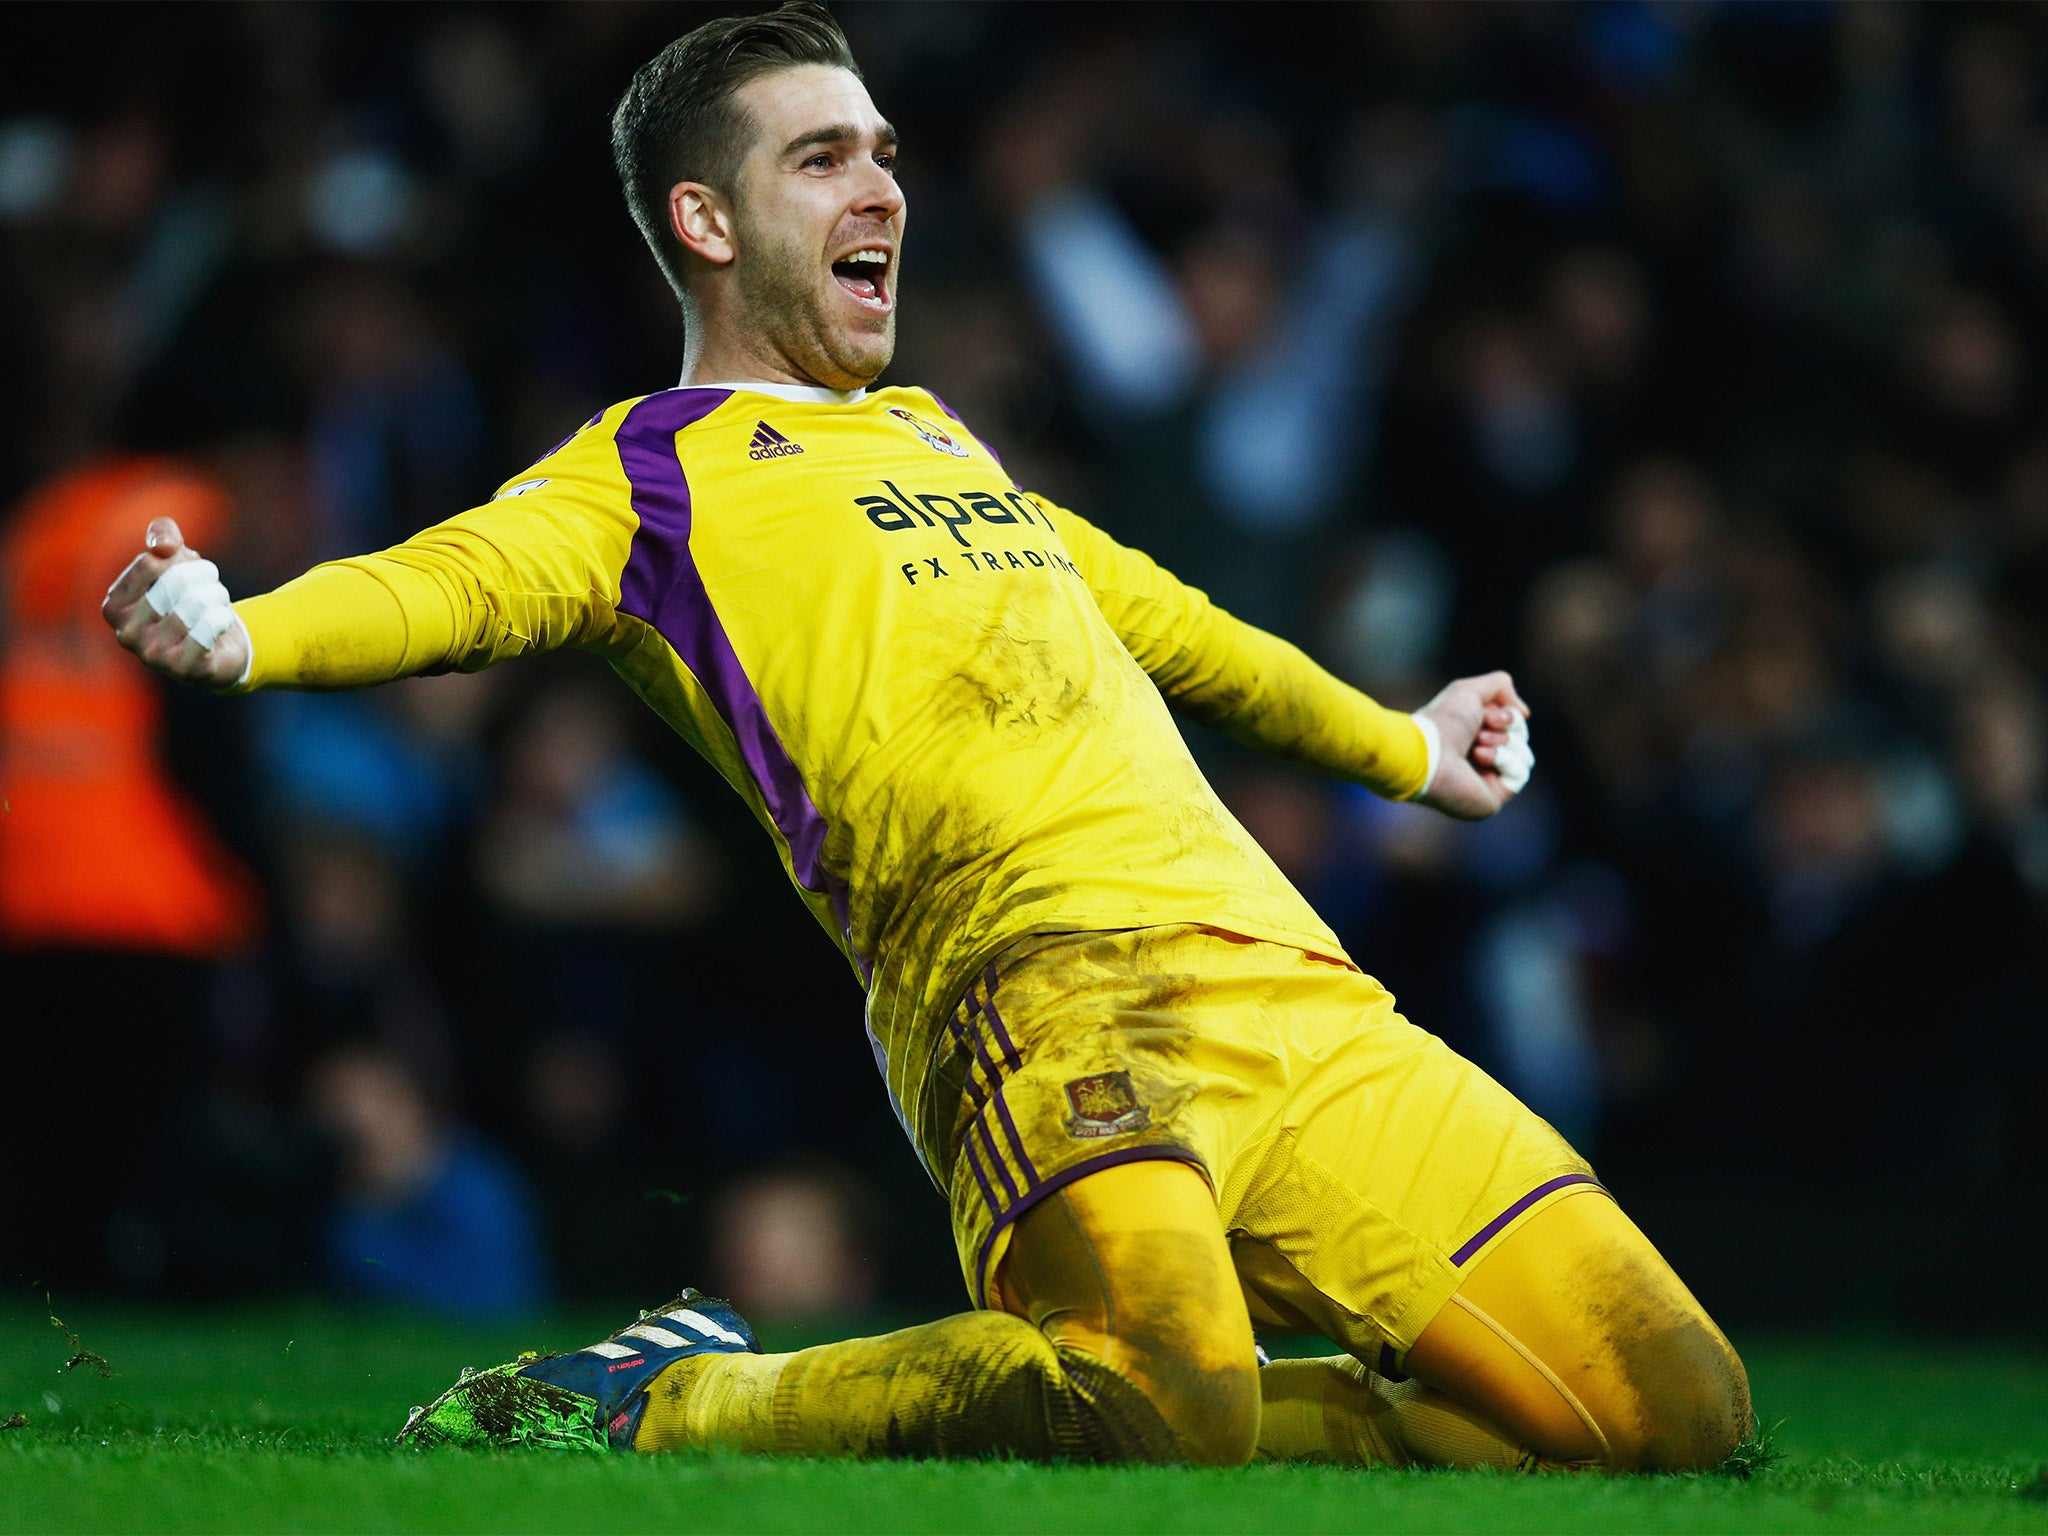 Adrian, the West Ham keeper, celebrates scoring the winning kick as his side beat Everton 9-8 on penalties after a thrilling FA Cup 2-2 draw